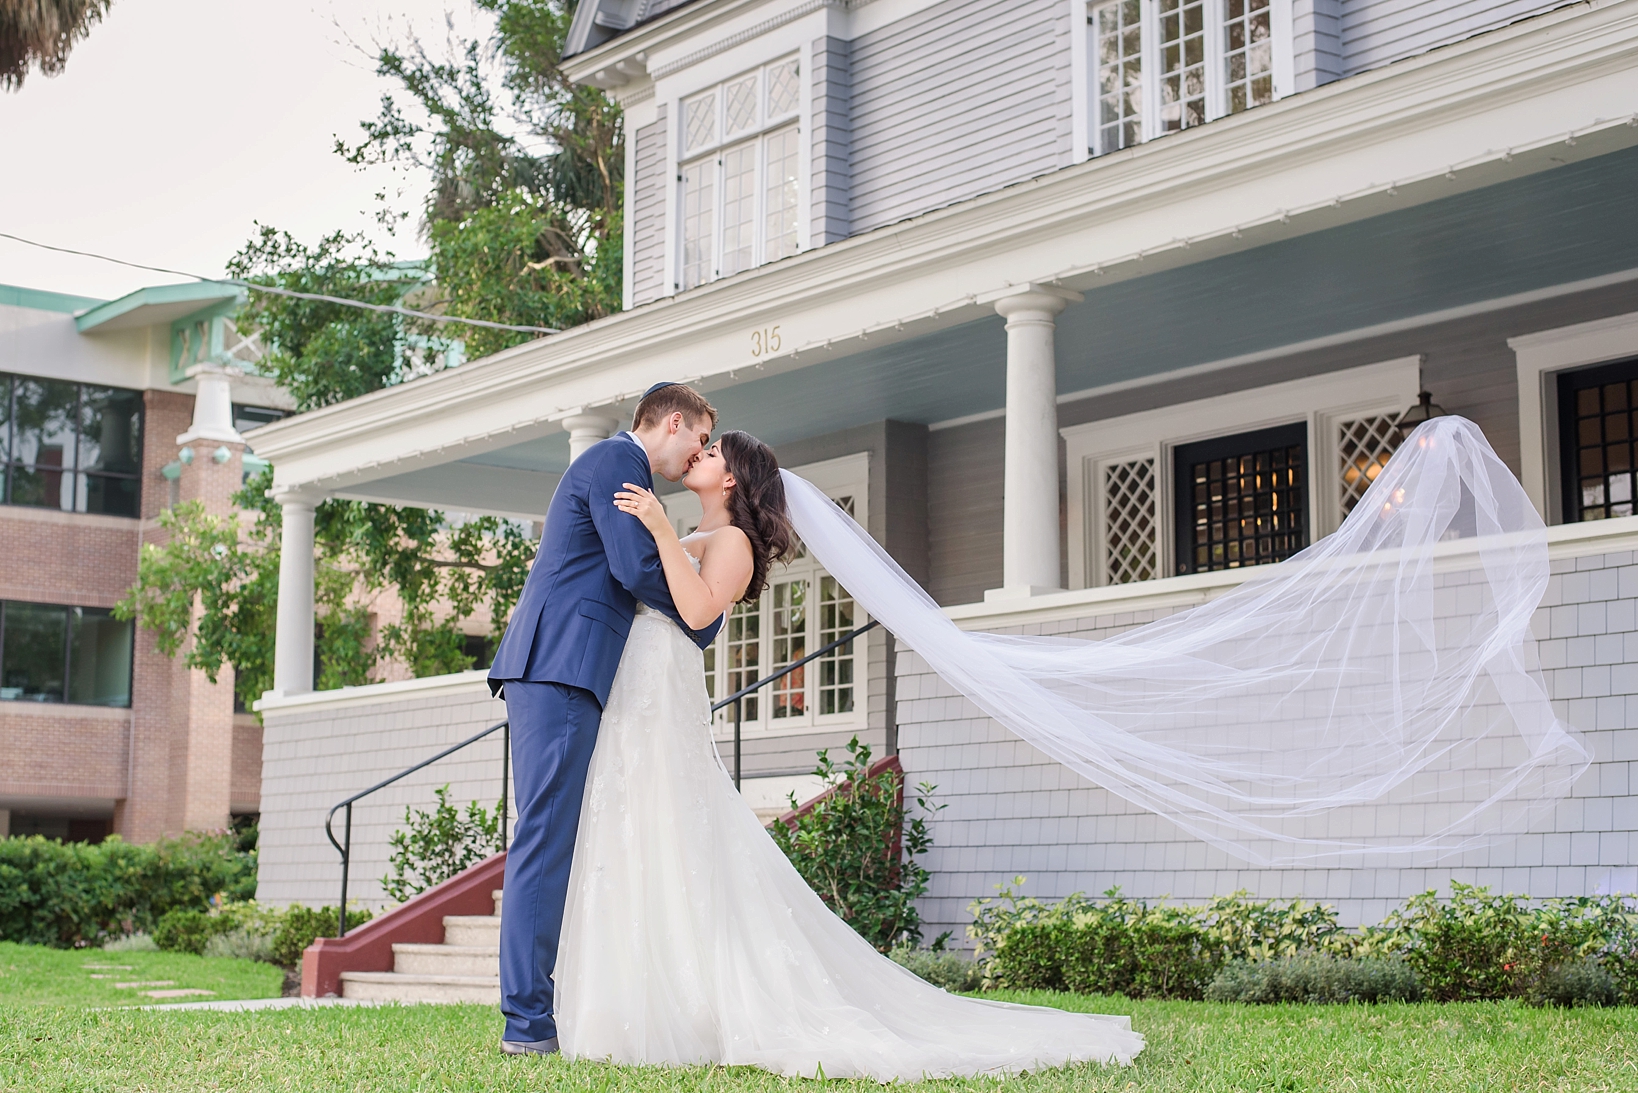 The bride and groom kiss on the front lawn as the wind sweeps the veil into the air